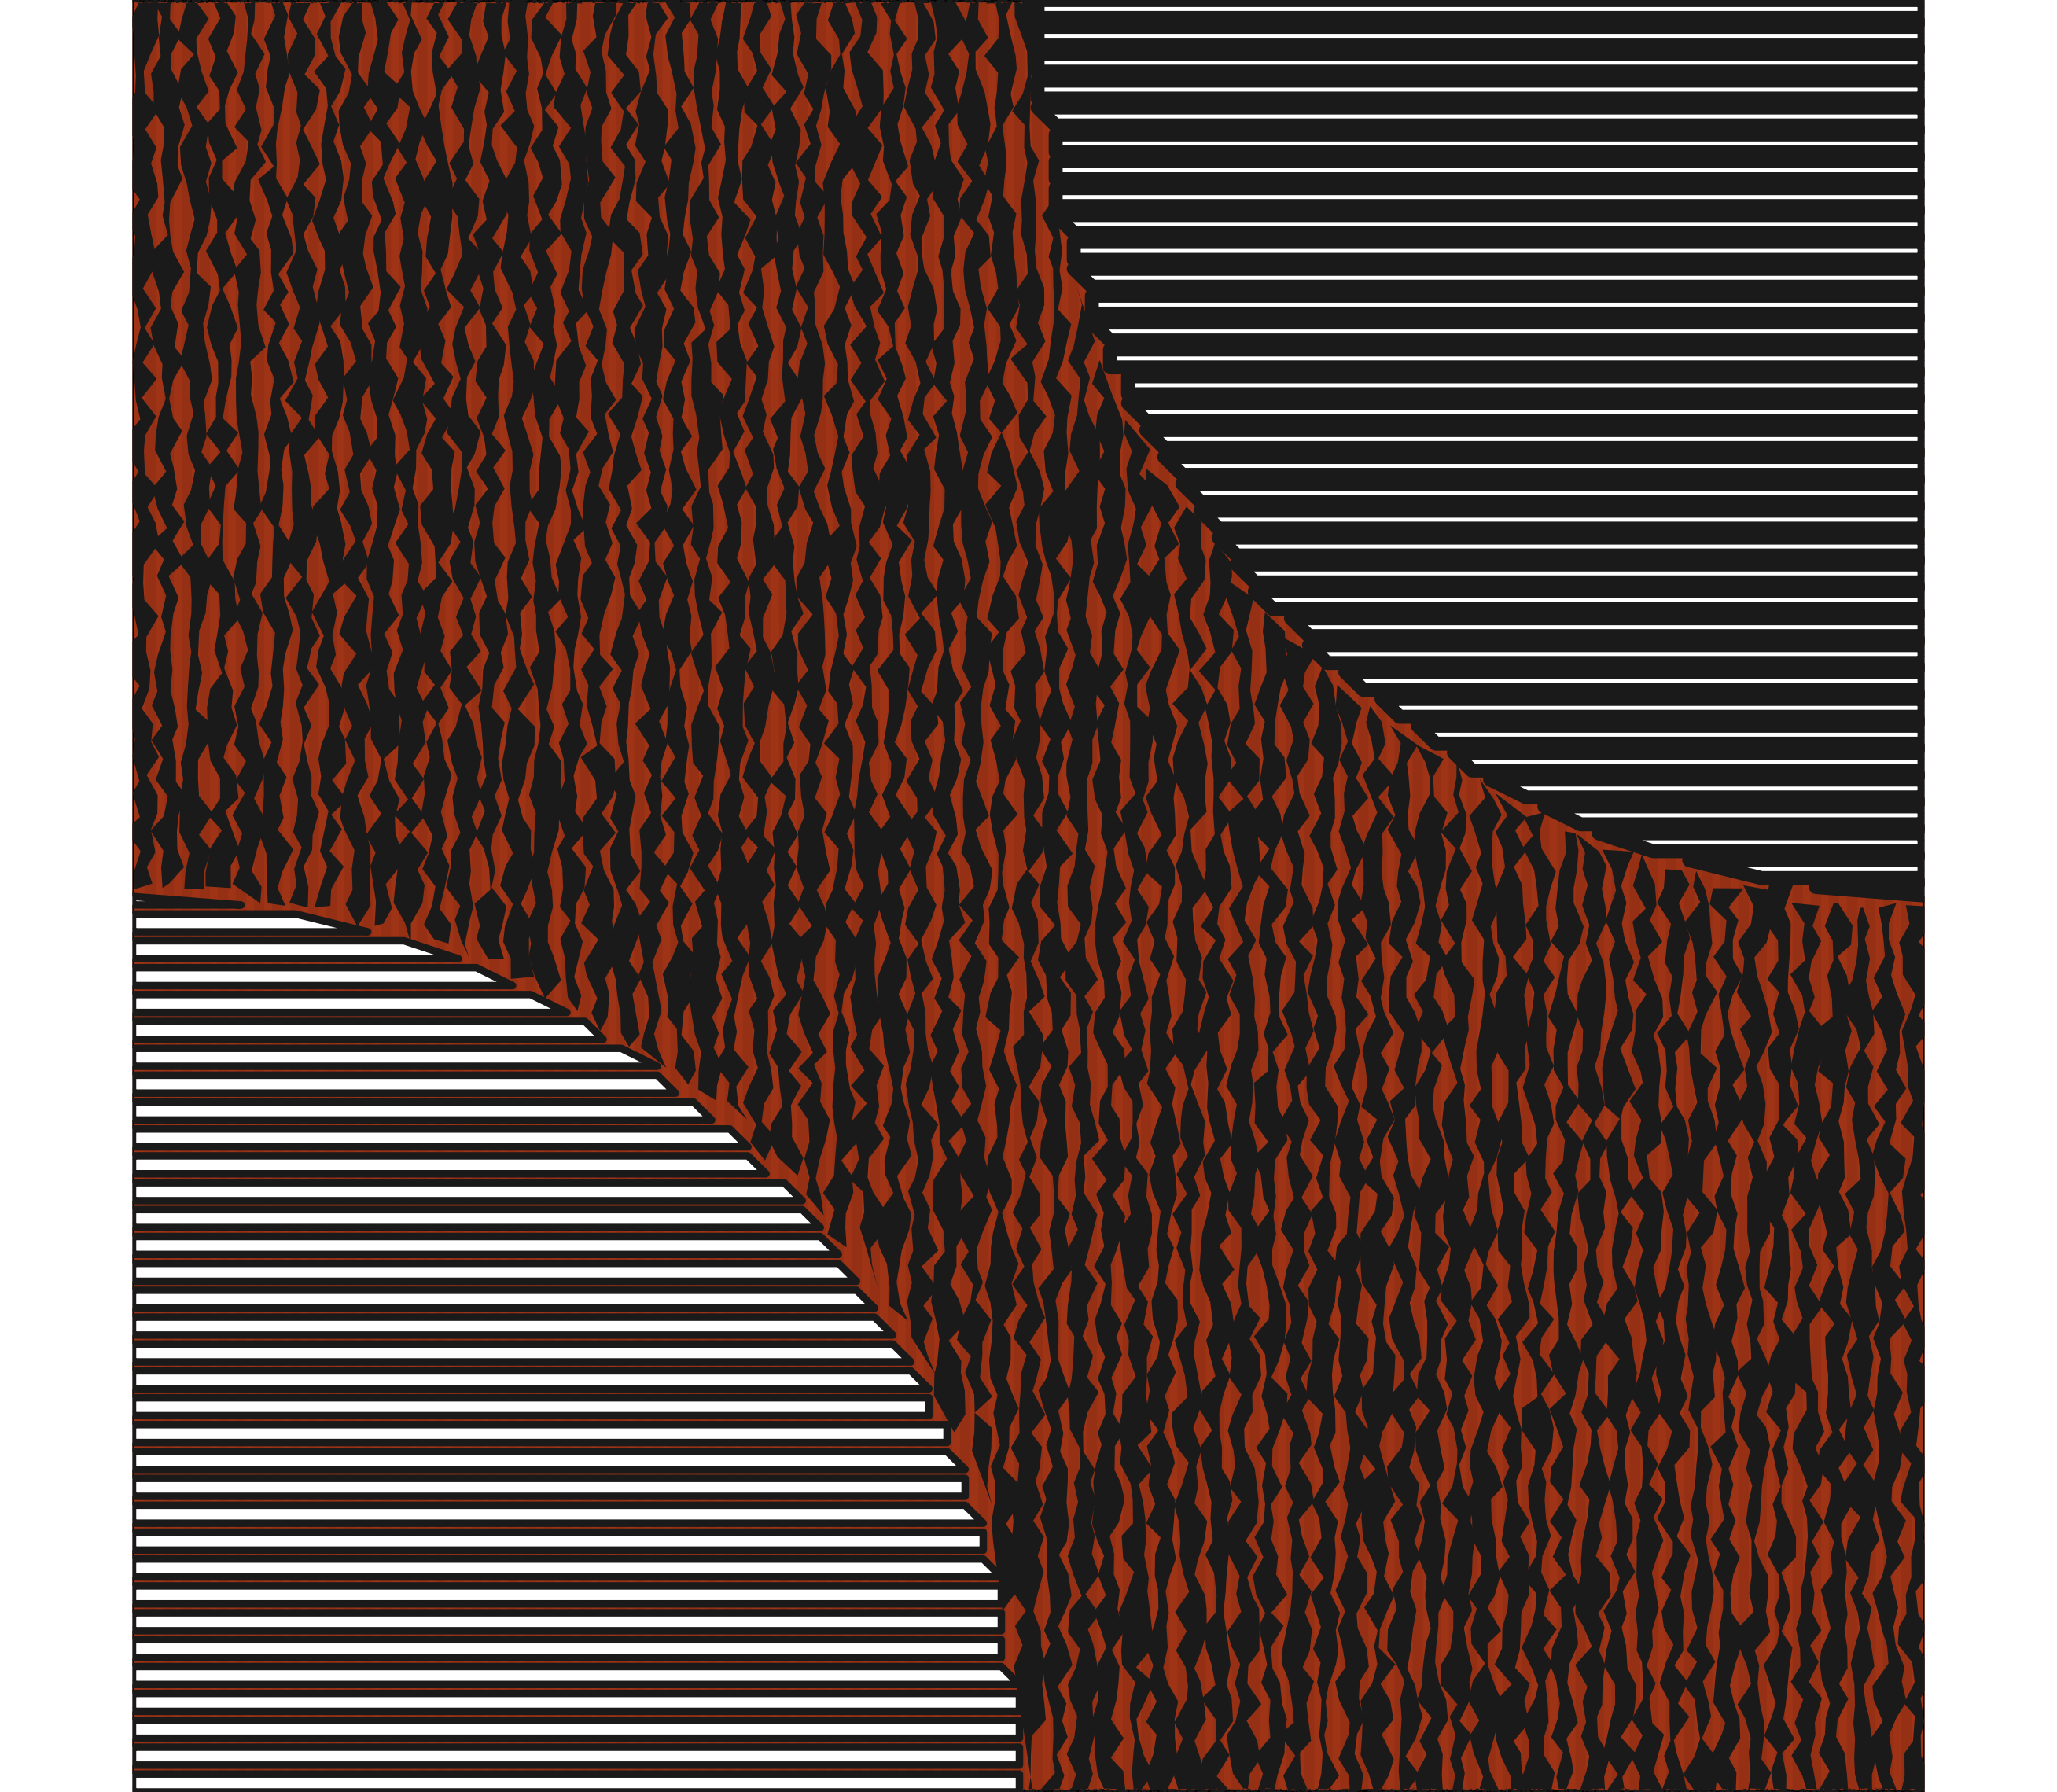 An image of two black and white striped quarte circles in the bottom left and top right of the image. The background of the image is filled with thick, distroted red and black lines.